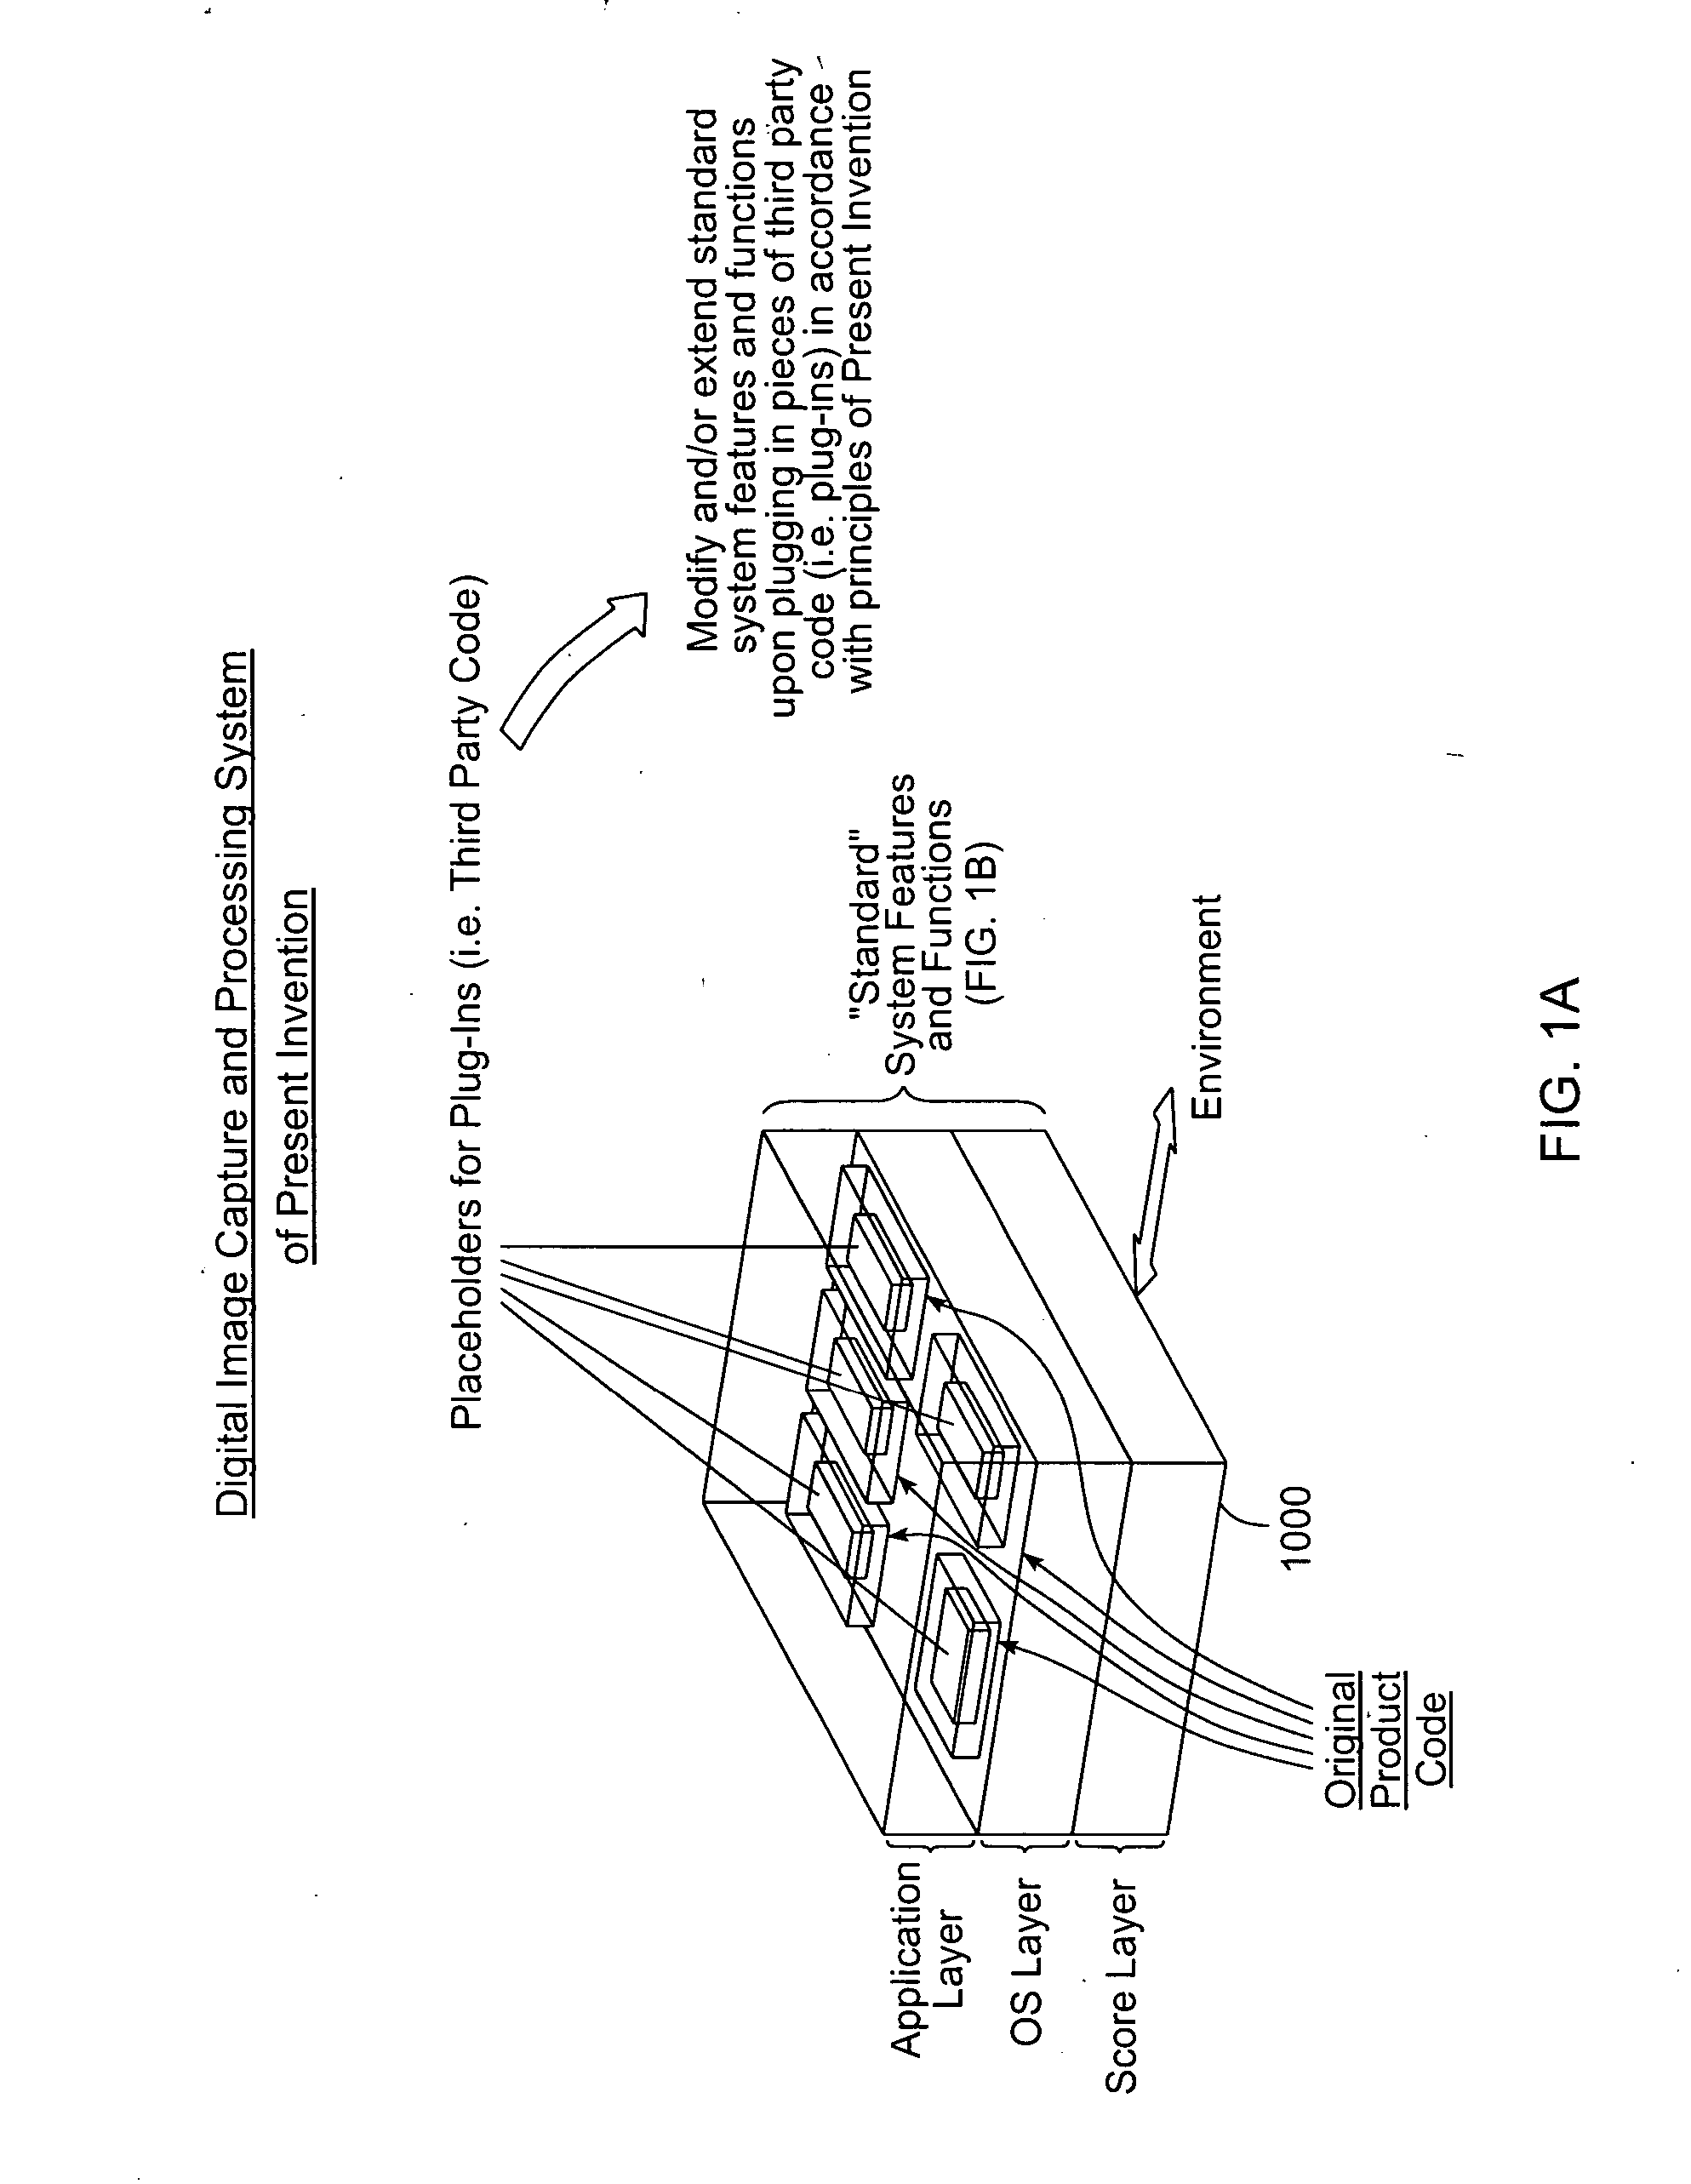 Digital image capture and processing system employing multi-layer software-based system architecture permitting modification and/or extension of system features and functions by way of third party code plug-ins